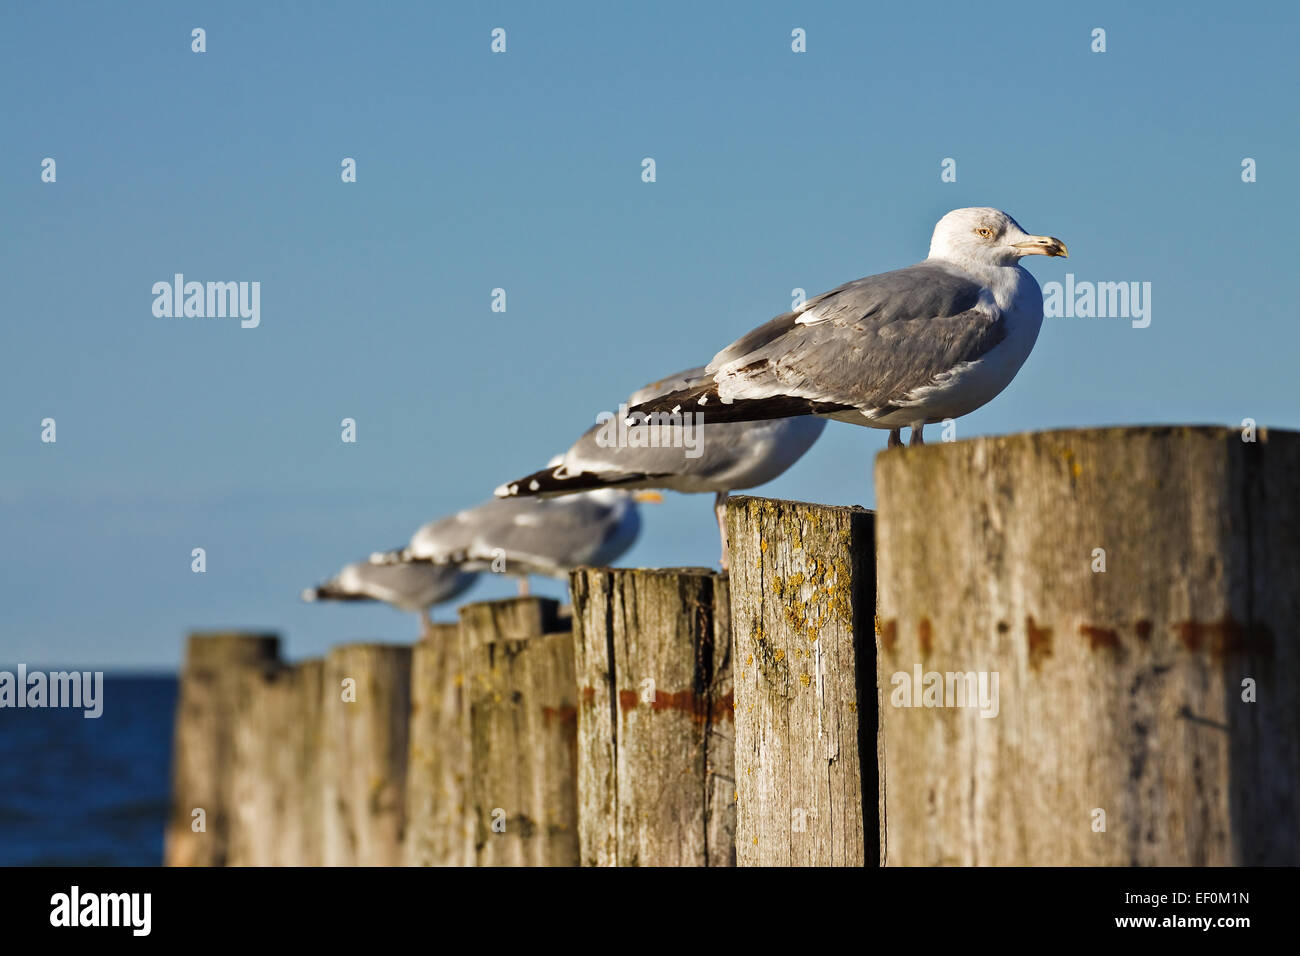 Seagulls on a stage. Stock Photo